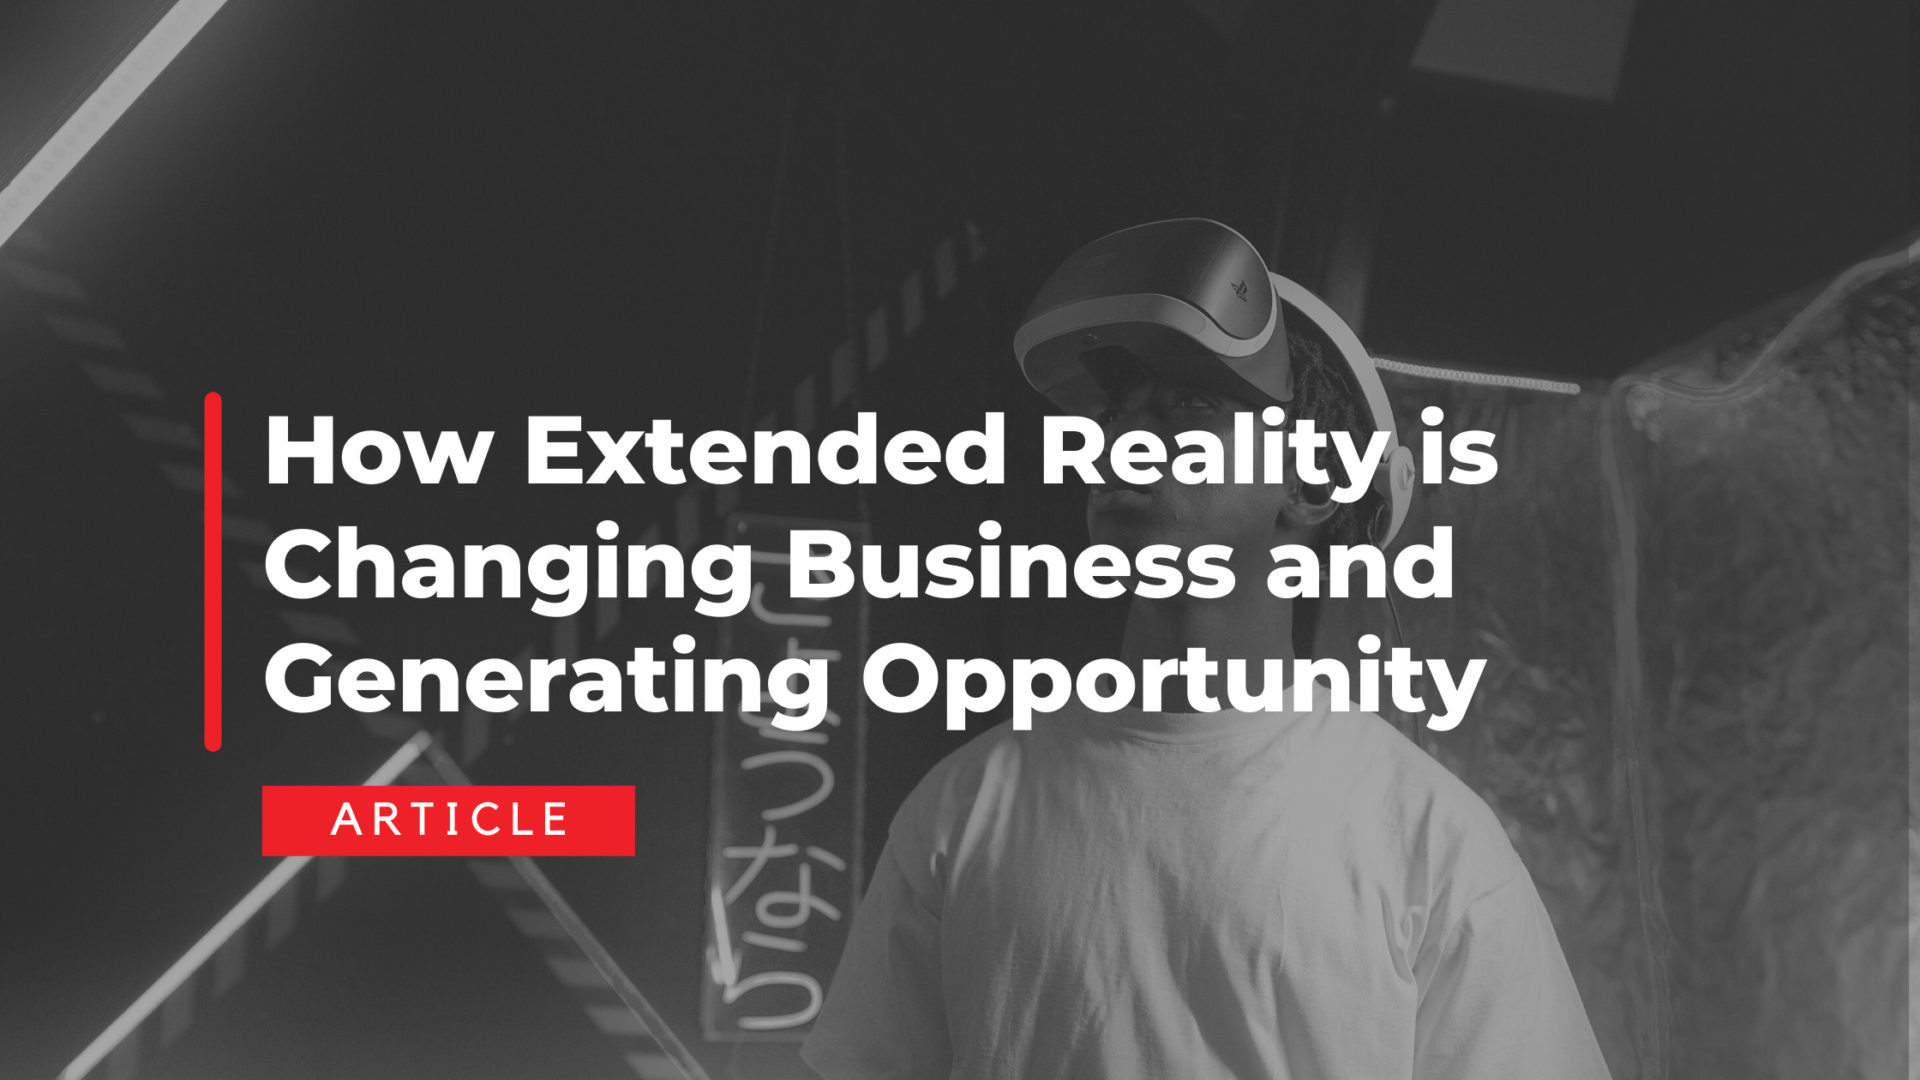 How Extended Reality is Changing Business and Generating Opportunity